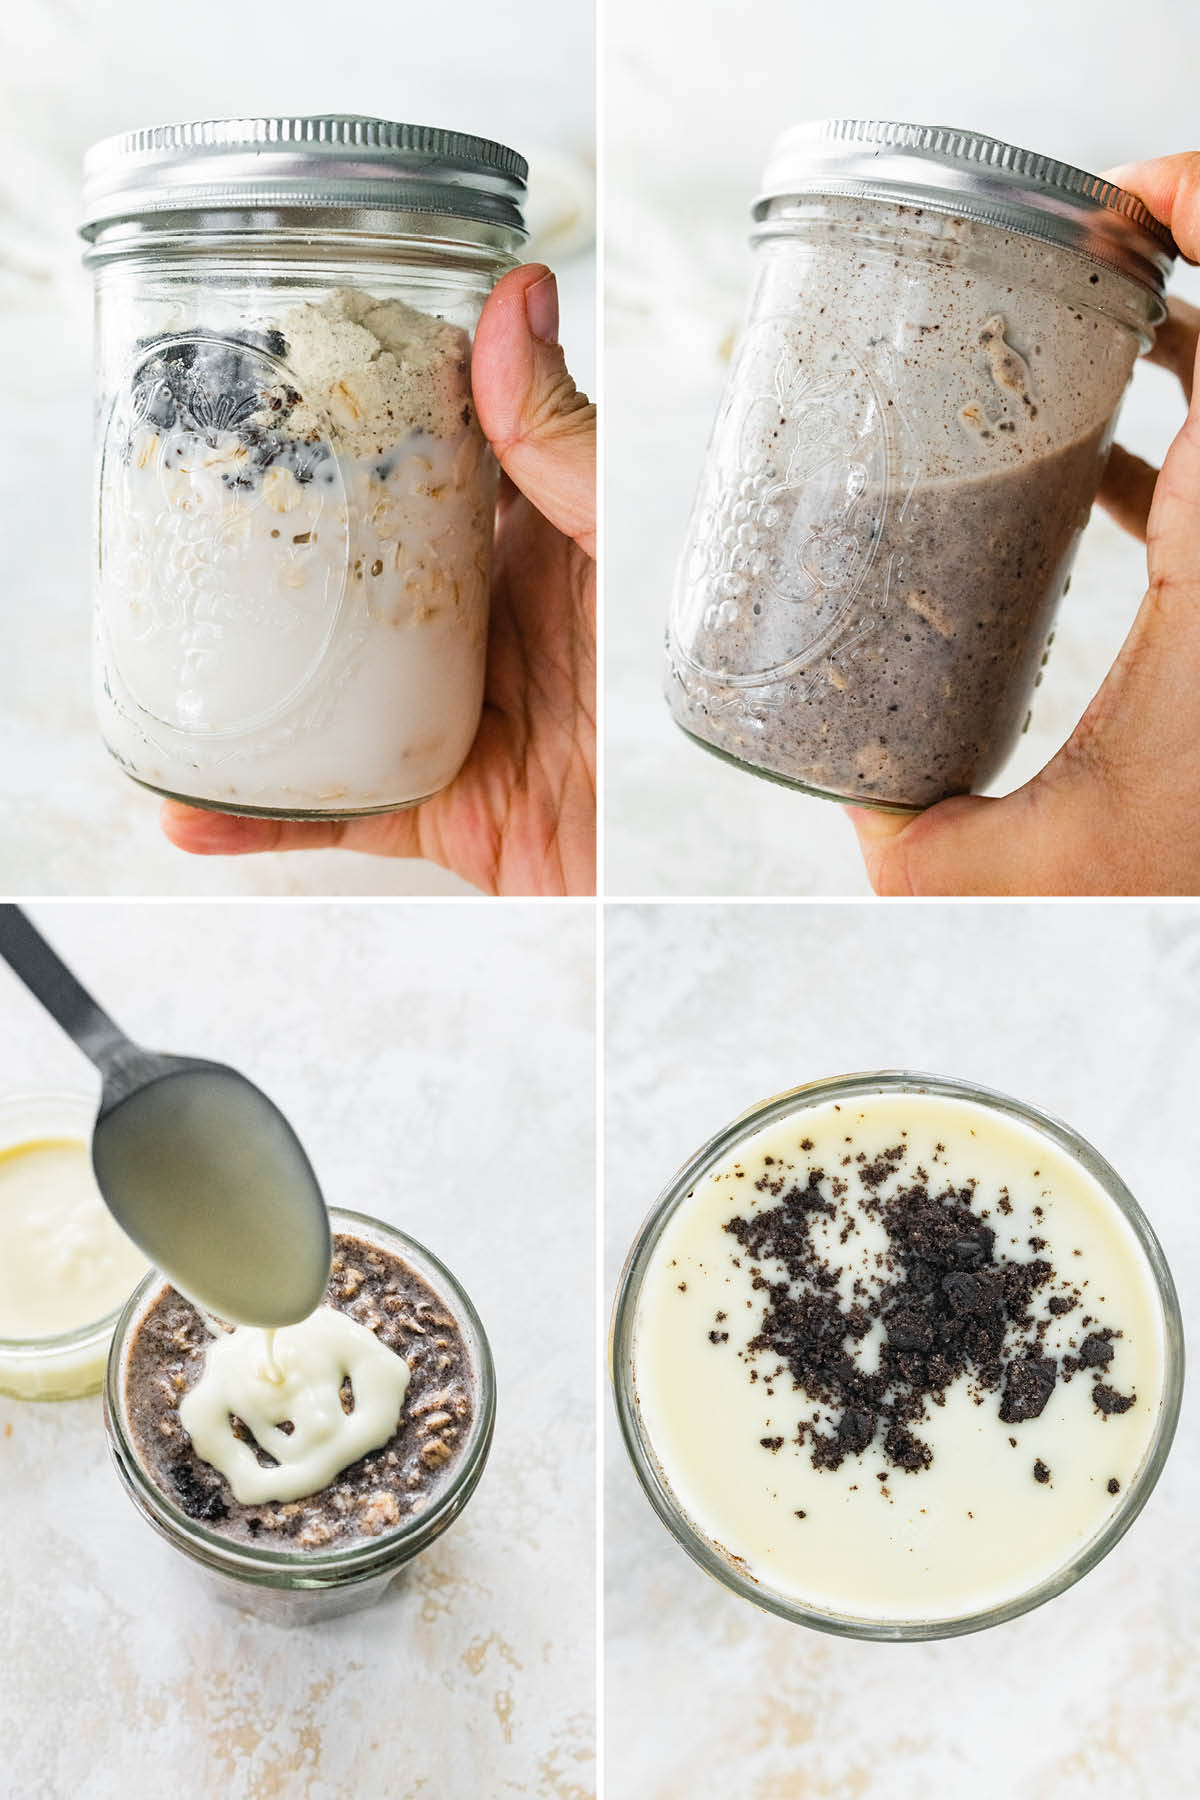 Four photos showing how to make Cookies and Cream Overnight Oats: mixing the oats ingredients and topping with melted white chocolate.